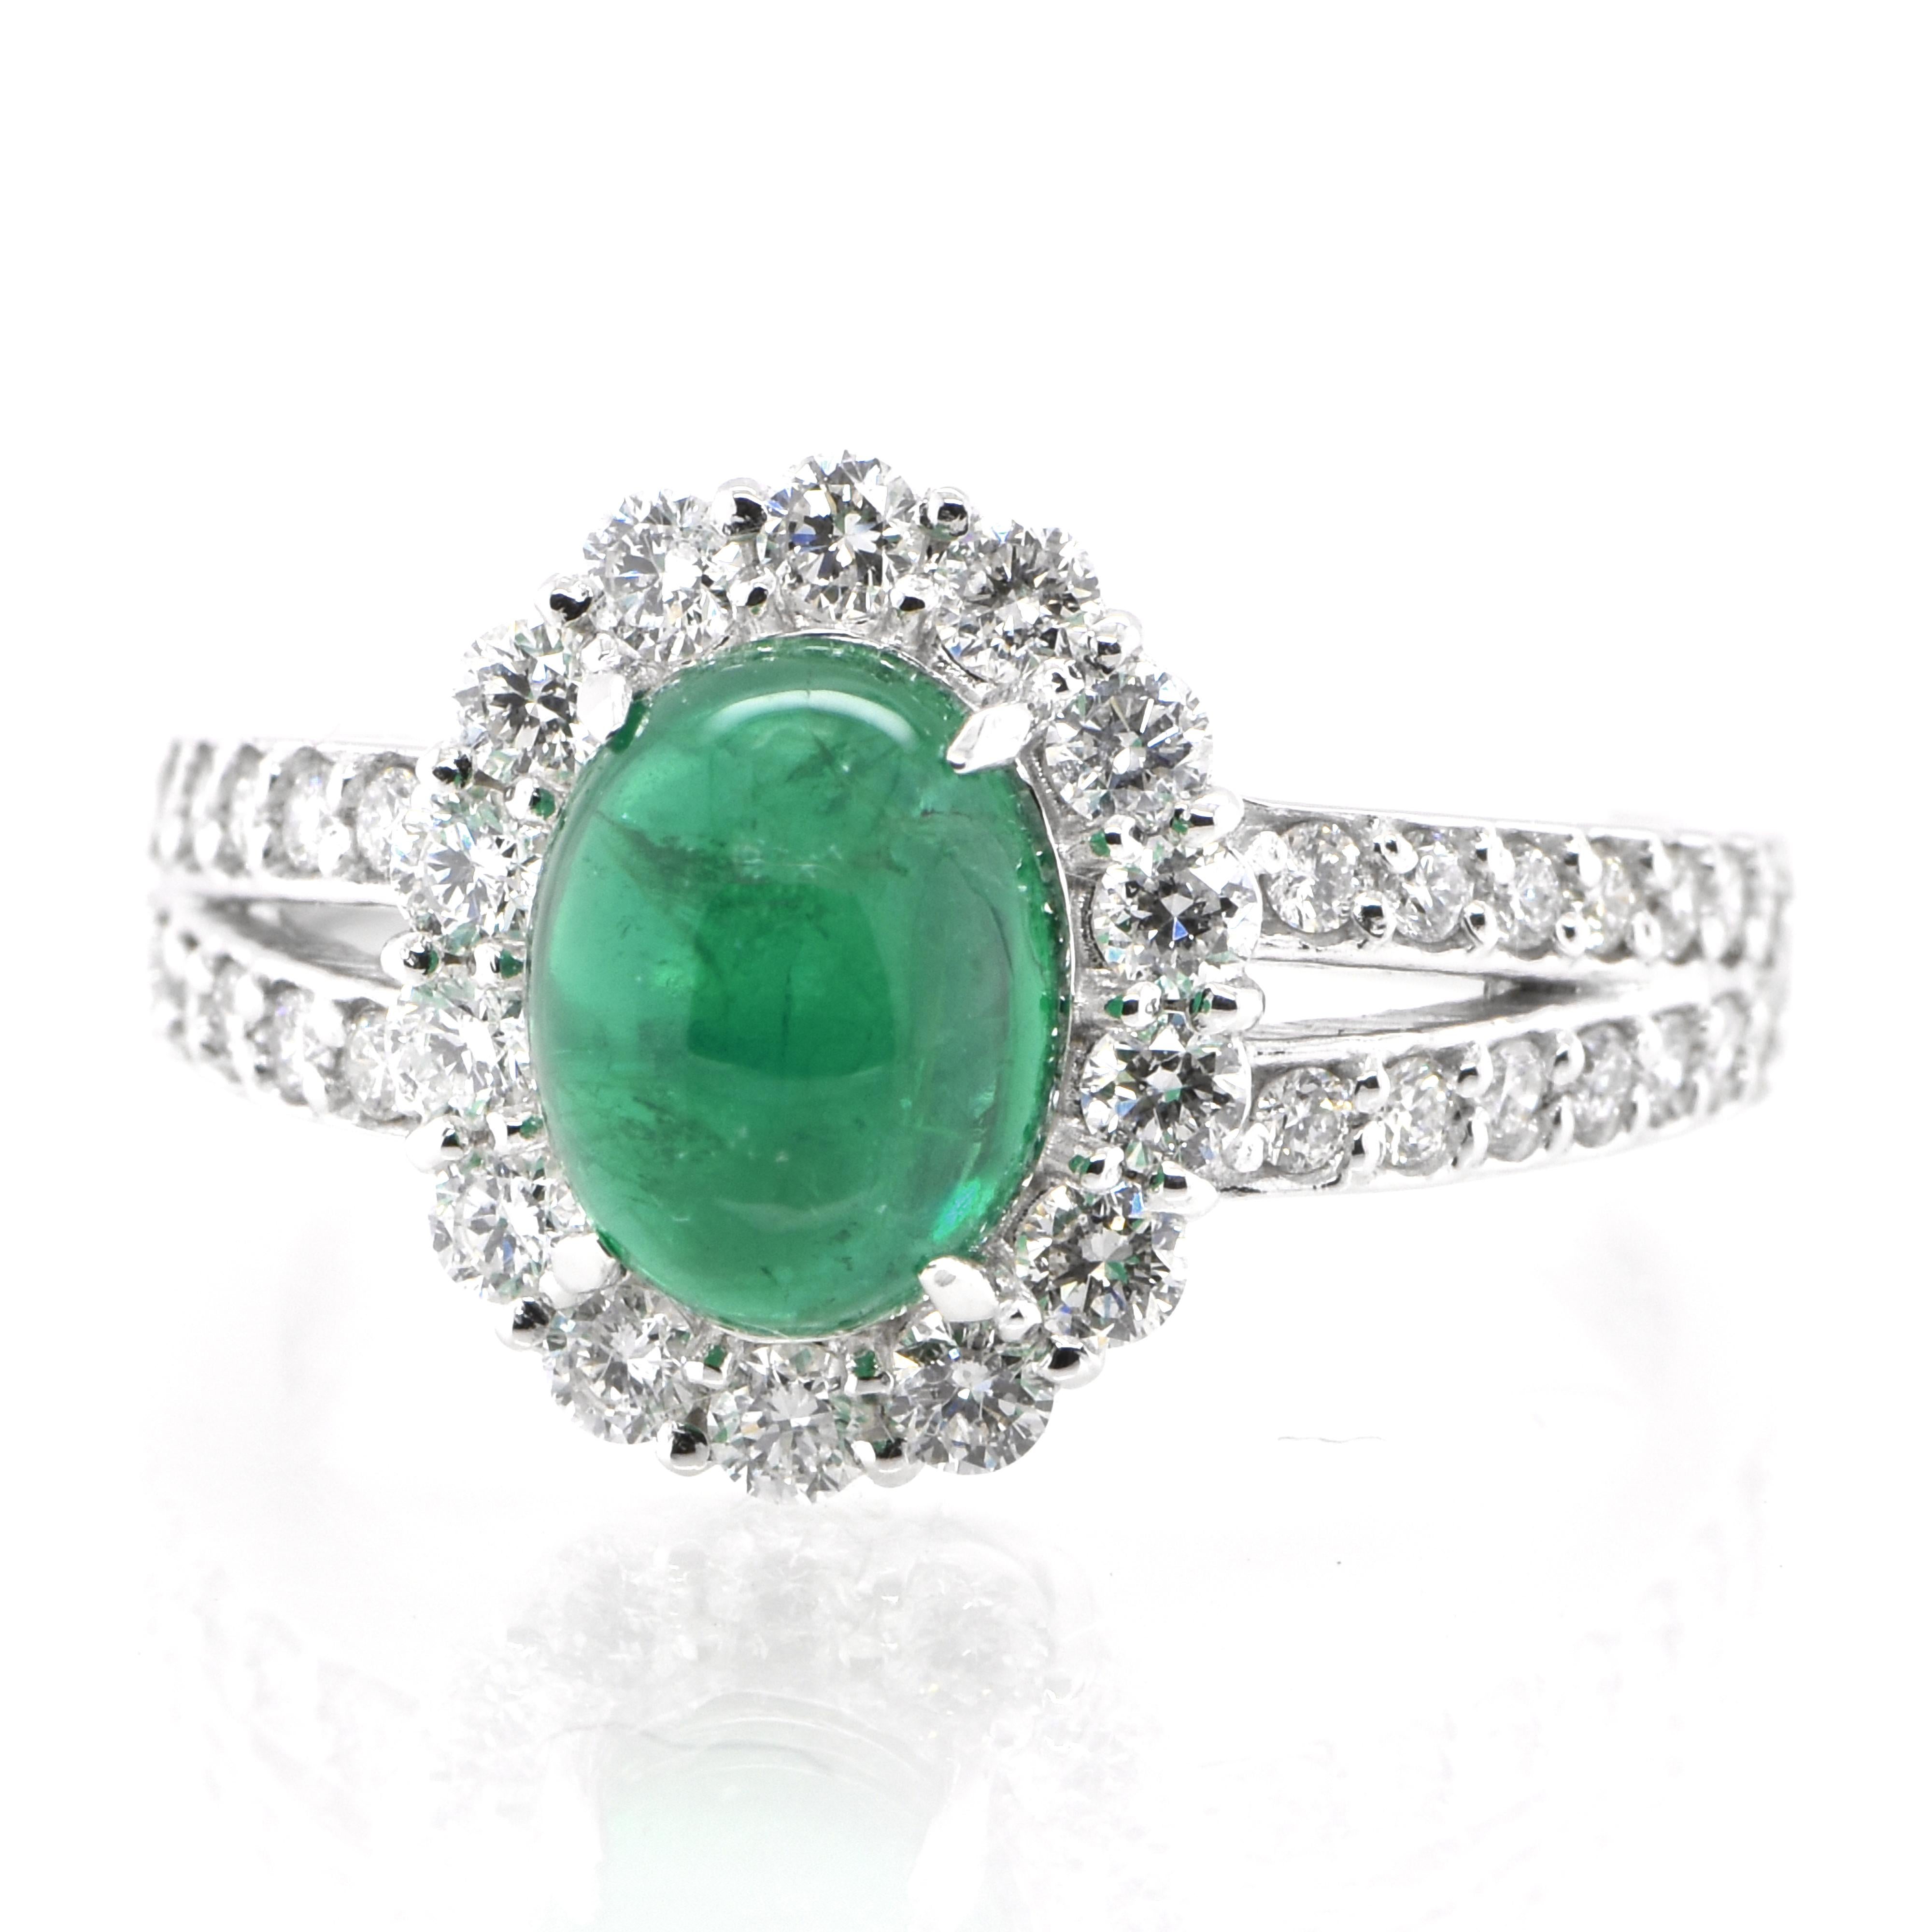 A stunning ring featuring a 2.07 Carat Natural Emerald Cabochon and 0.66 Carats of Diamond Accents set in Platinum. People have admired emerald’s green for thousands of years. Emeralds have always been associated with the lushest landscapes and the